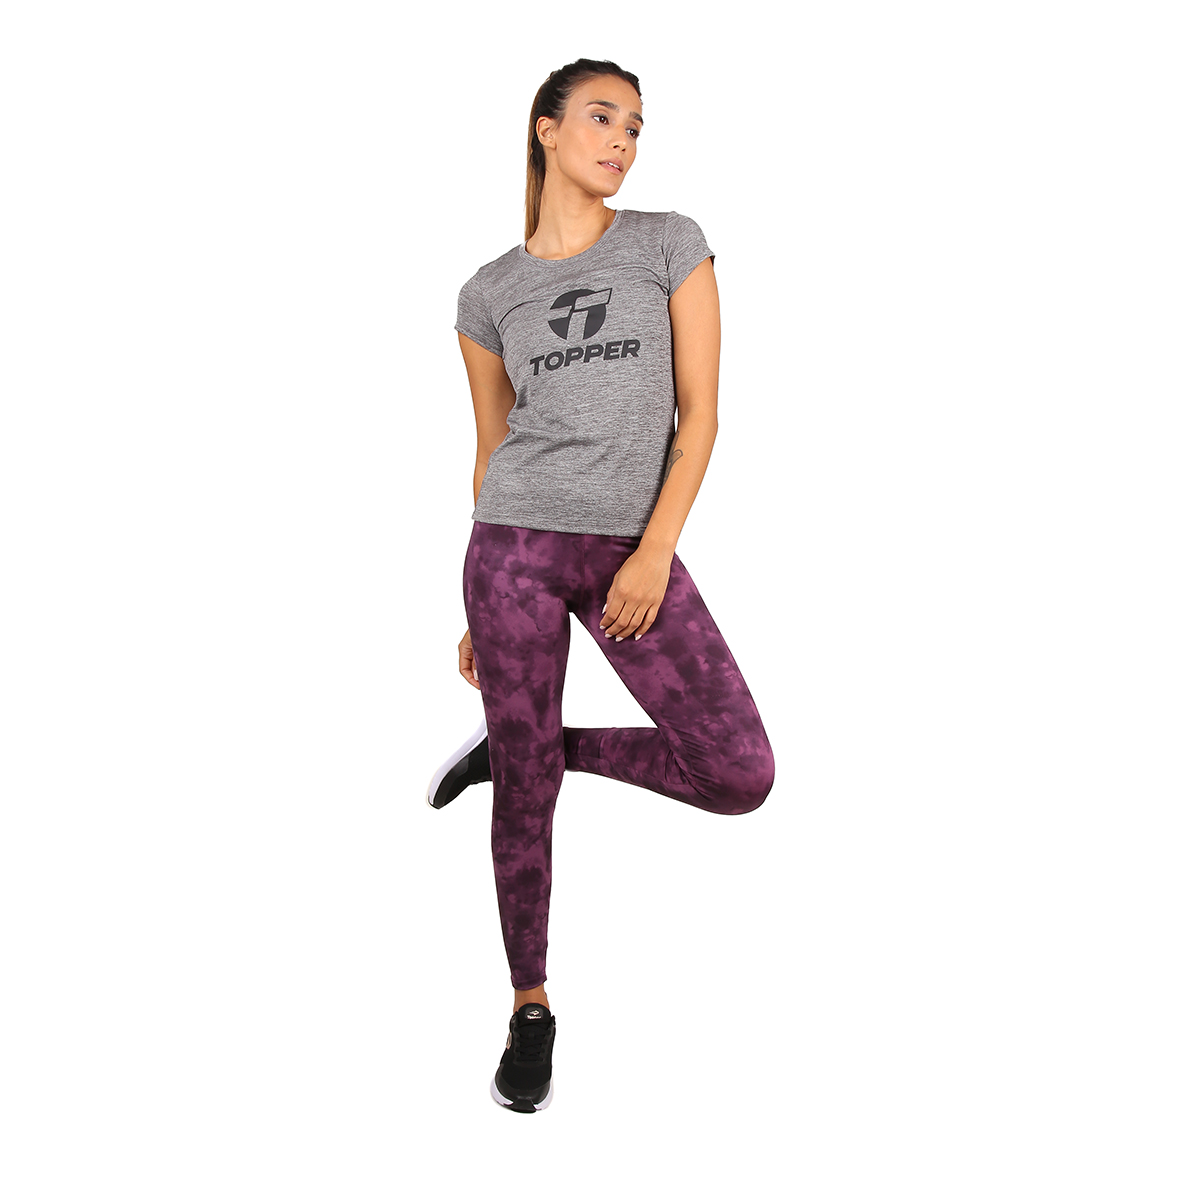 Remera Entrenamiento Topper Brand Mujer,  image number null